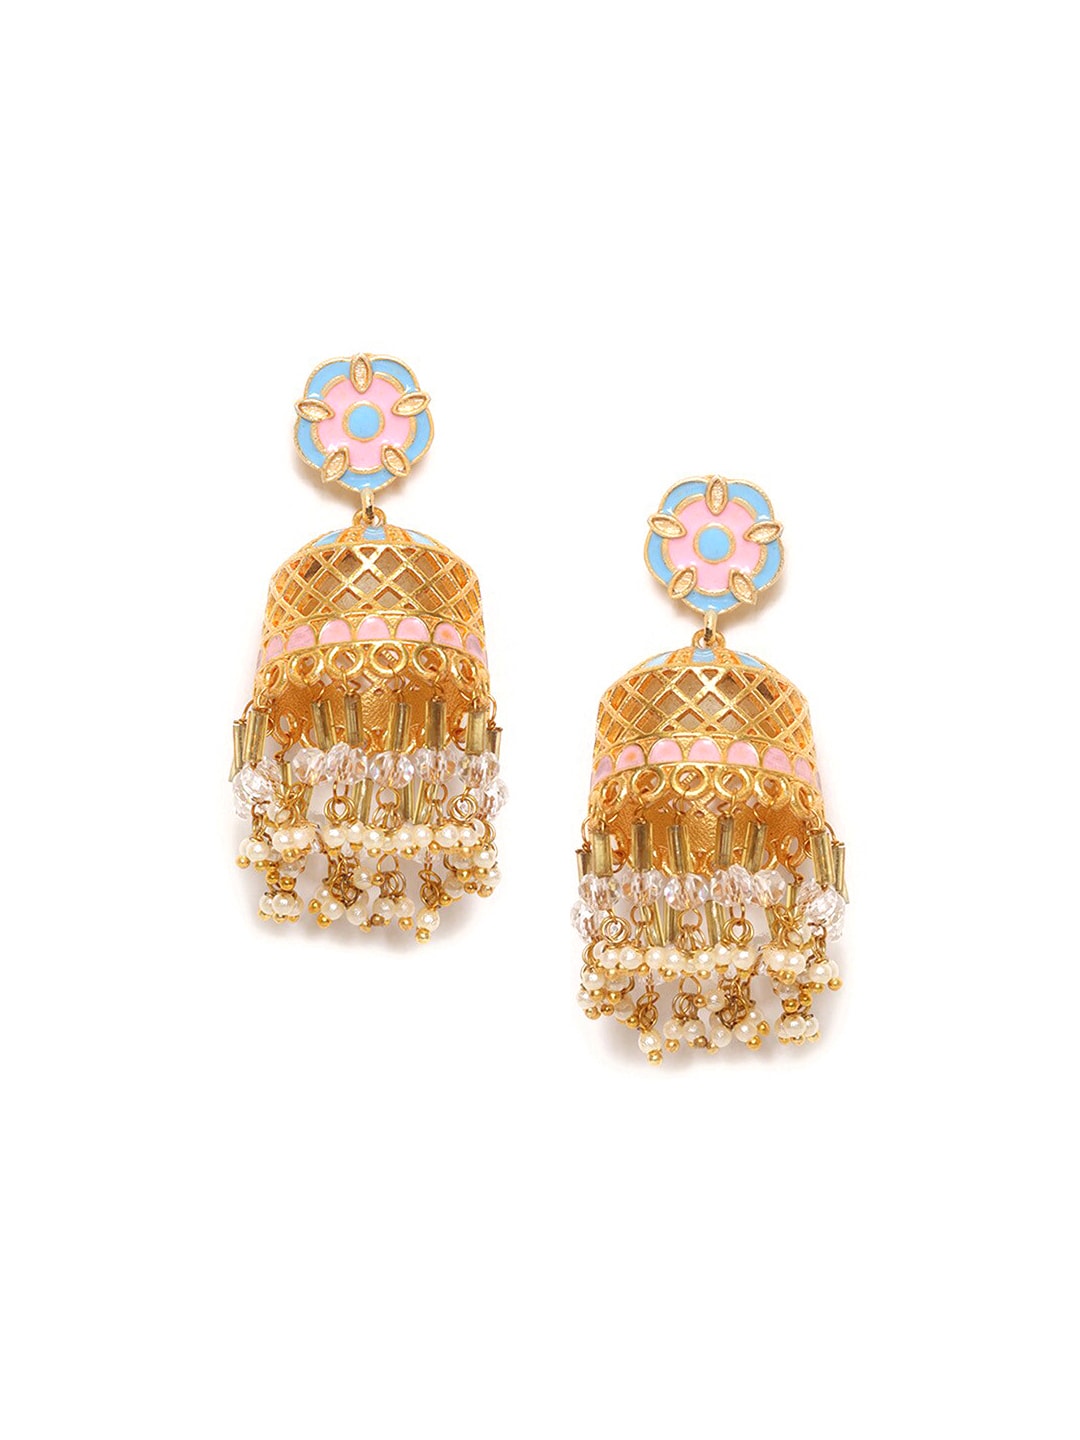 W Pink Dome Shaped Jhumkas Earrings Price in India